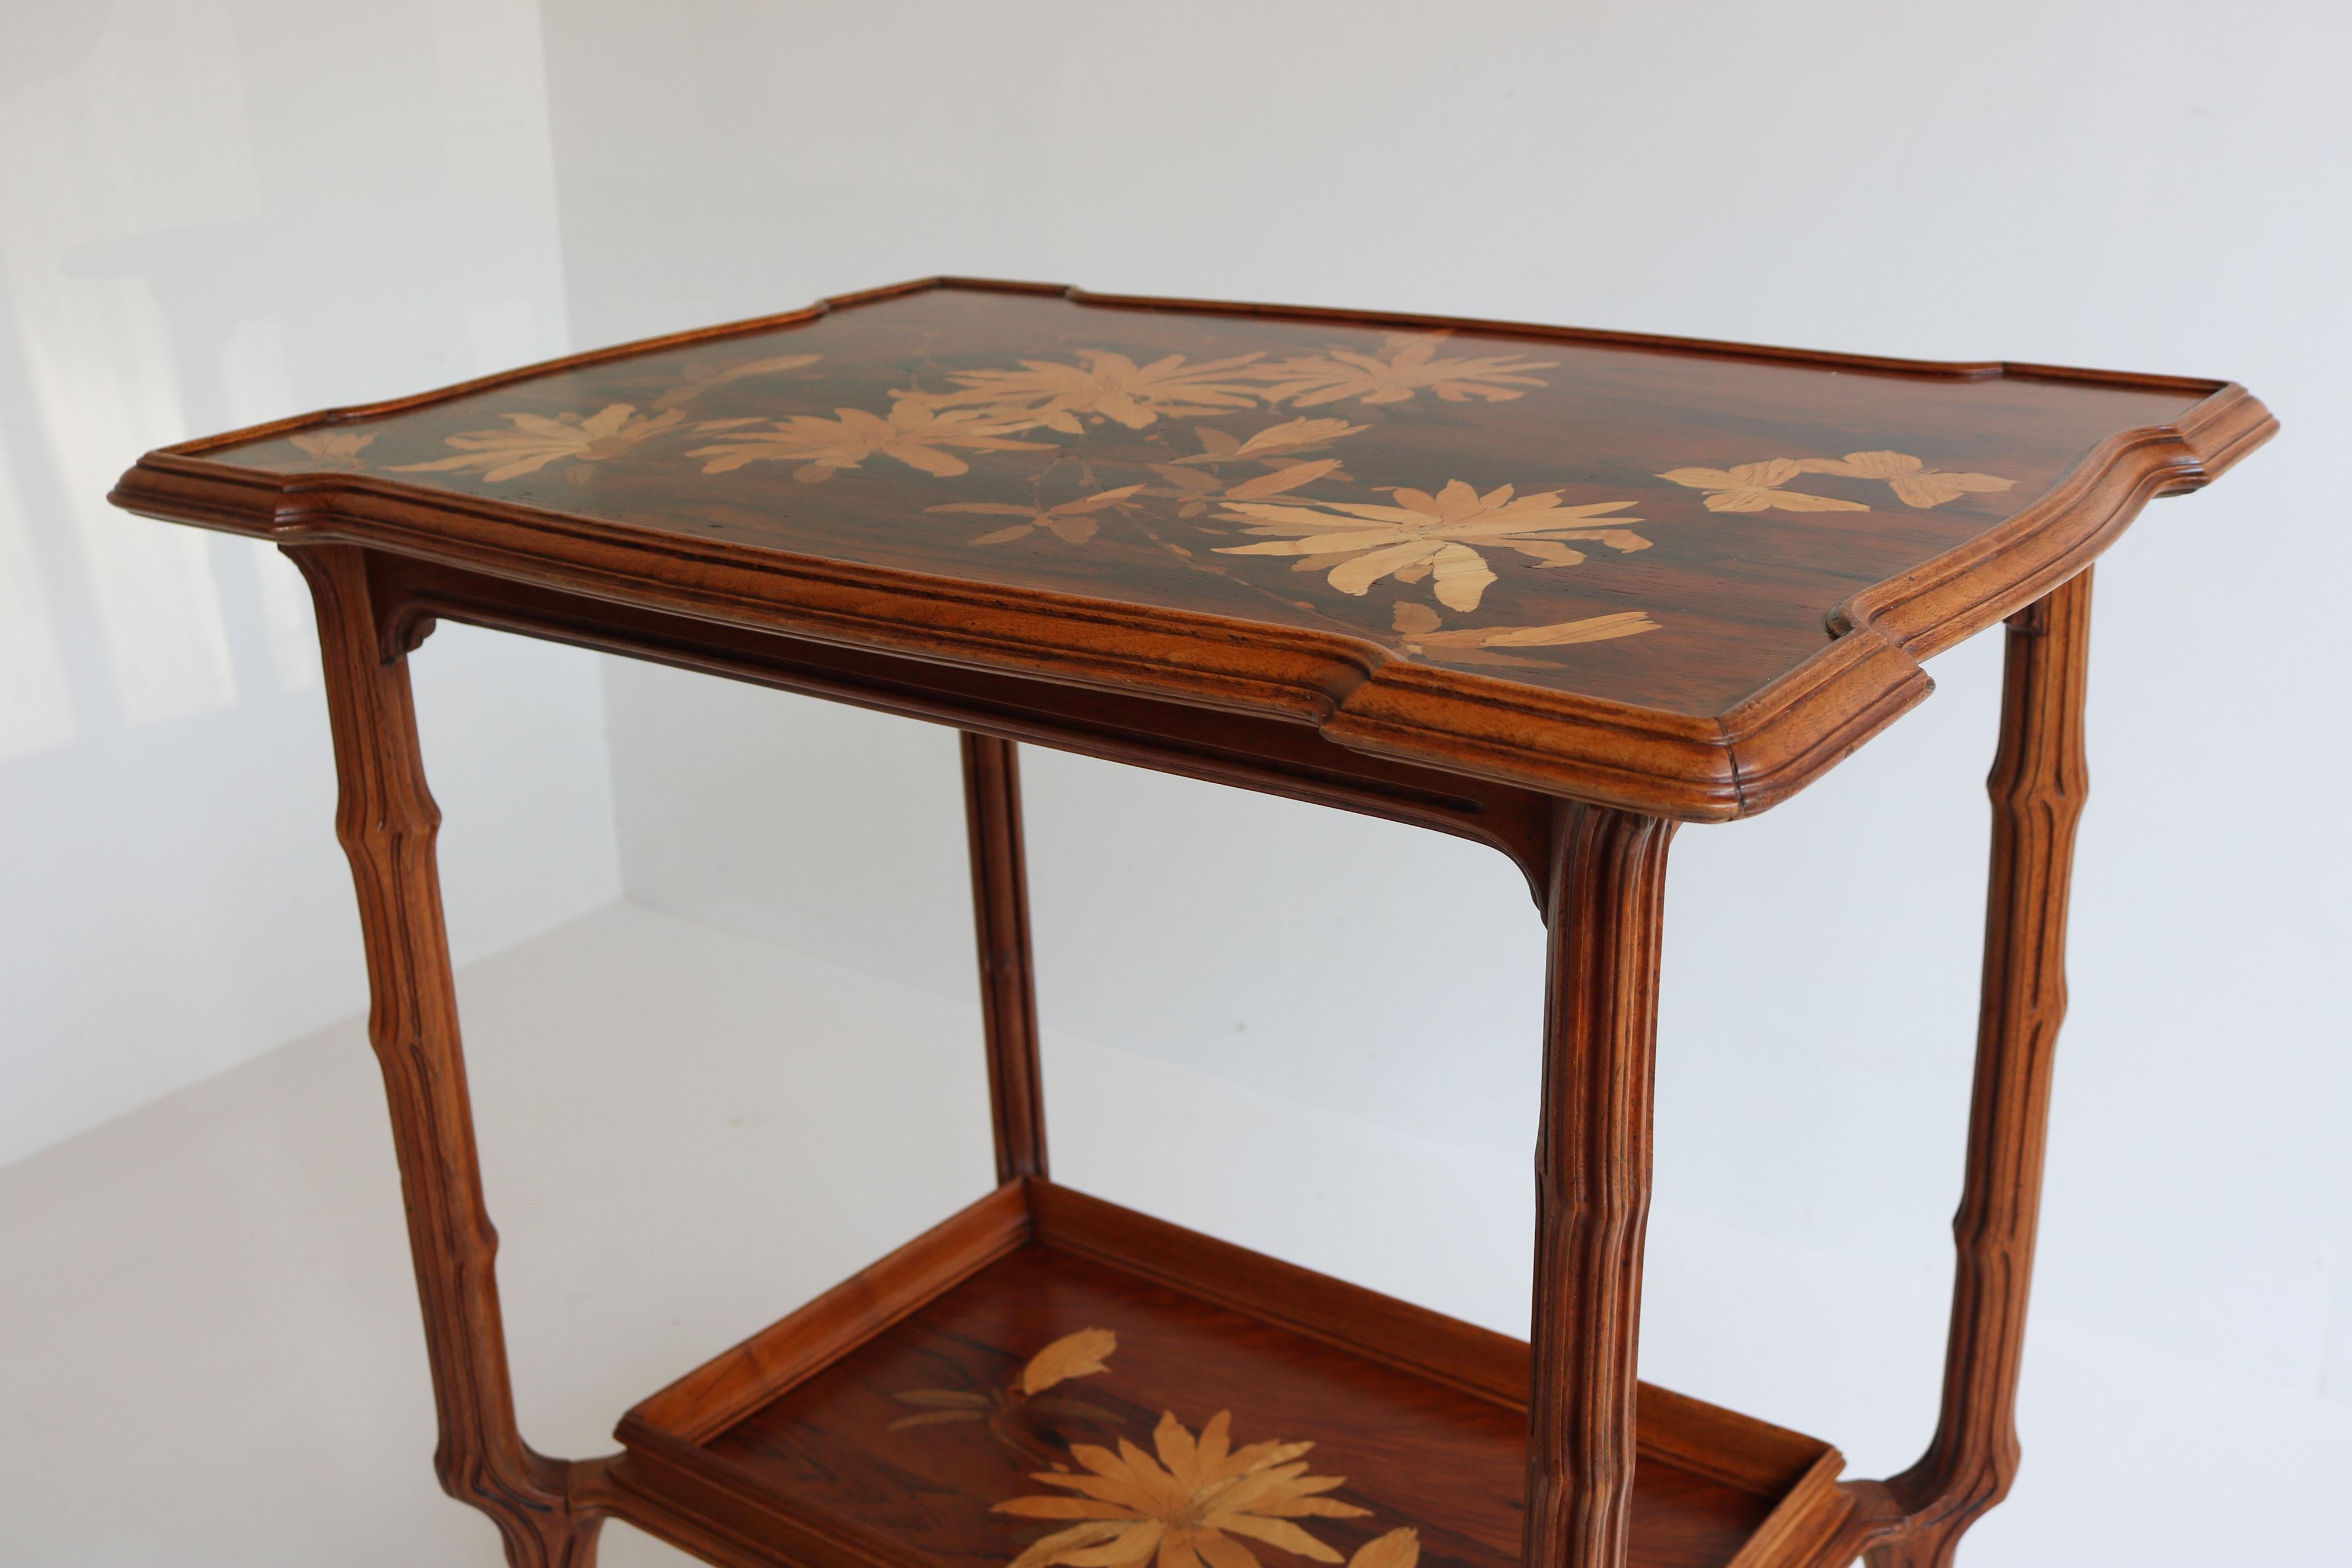 Original French Art Nouveau Marquetry Table ''Japonisme'' by Emile Galle 1900 For Sale 2